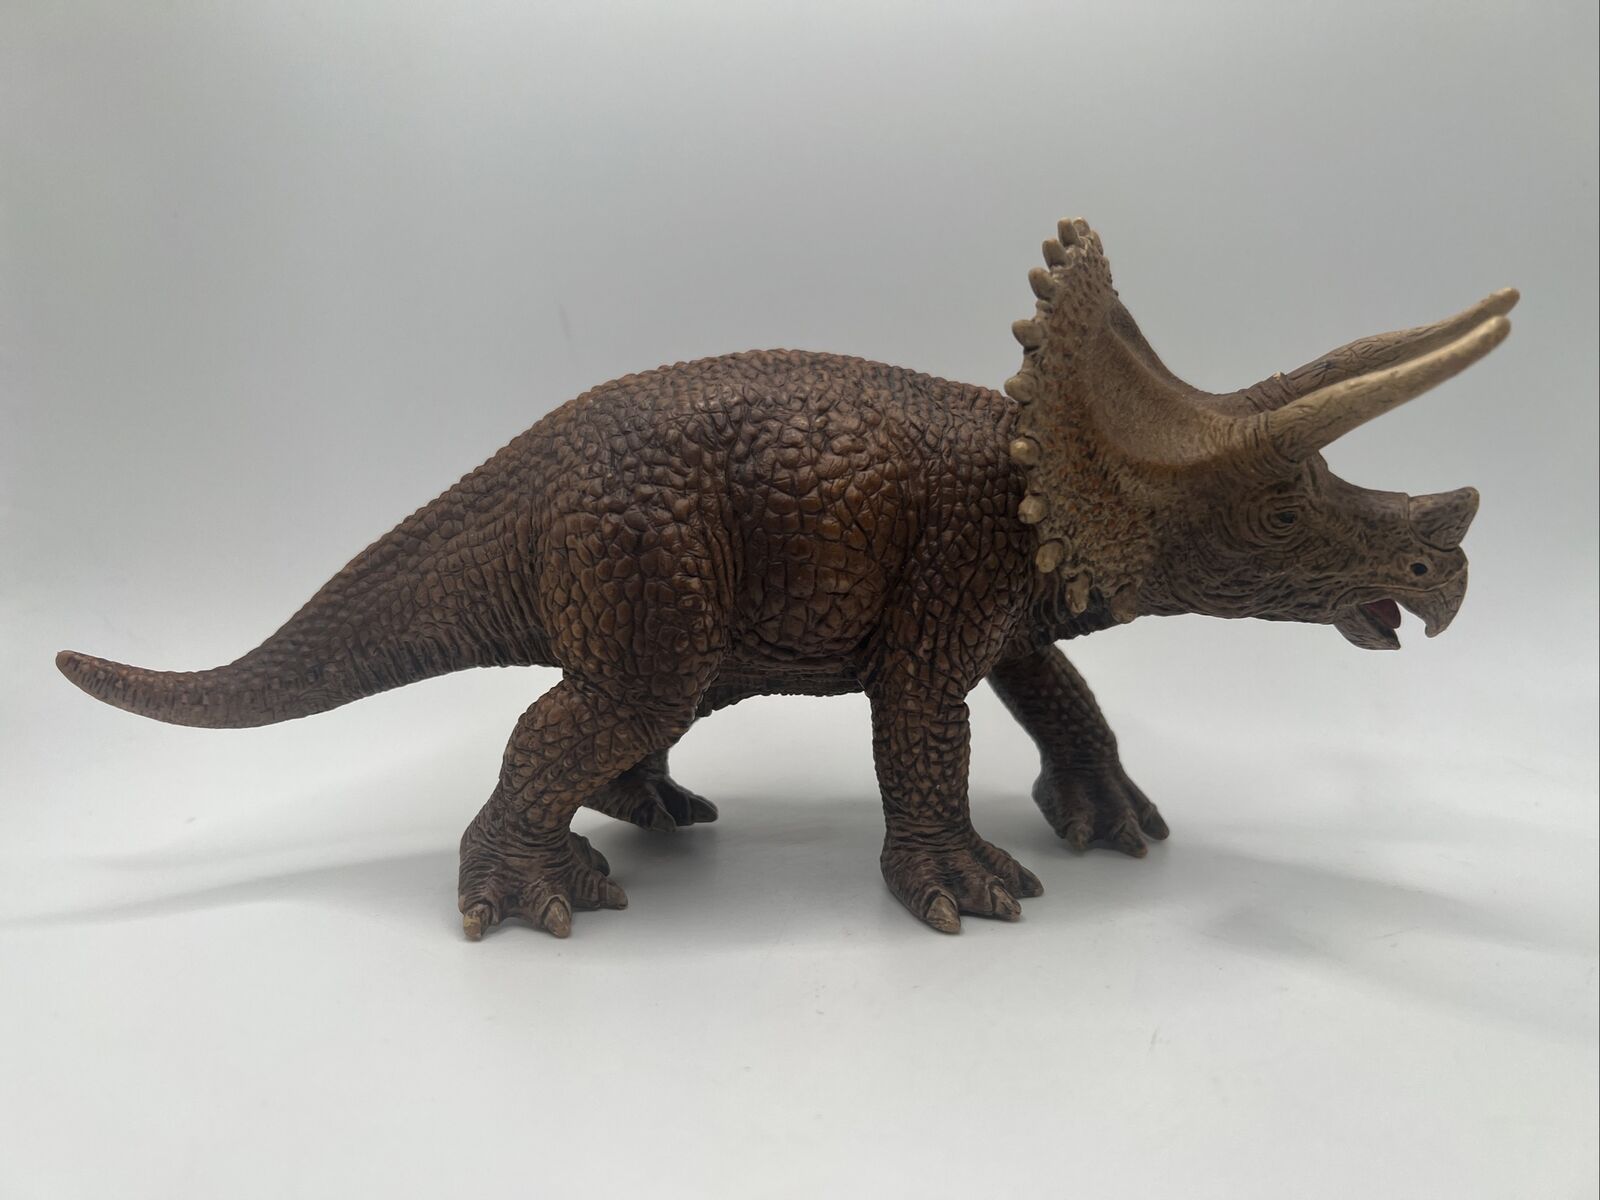 2011 Schleich Triceratops Realistic Dinosaur Collectible Figure D-73527 Brown 8”